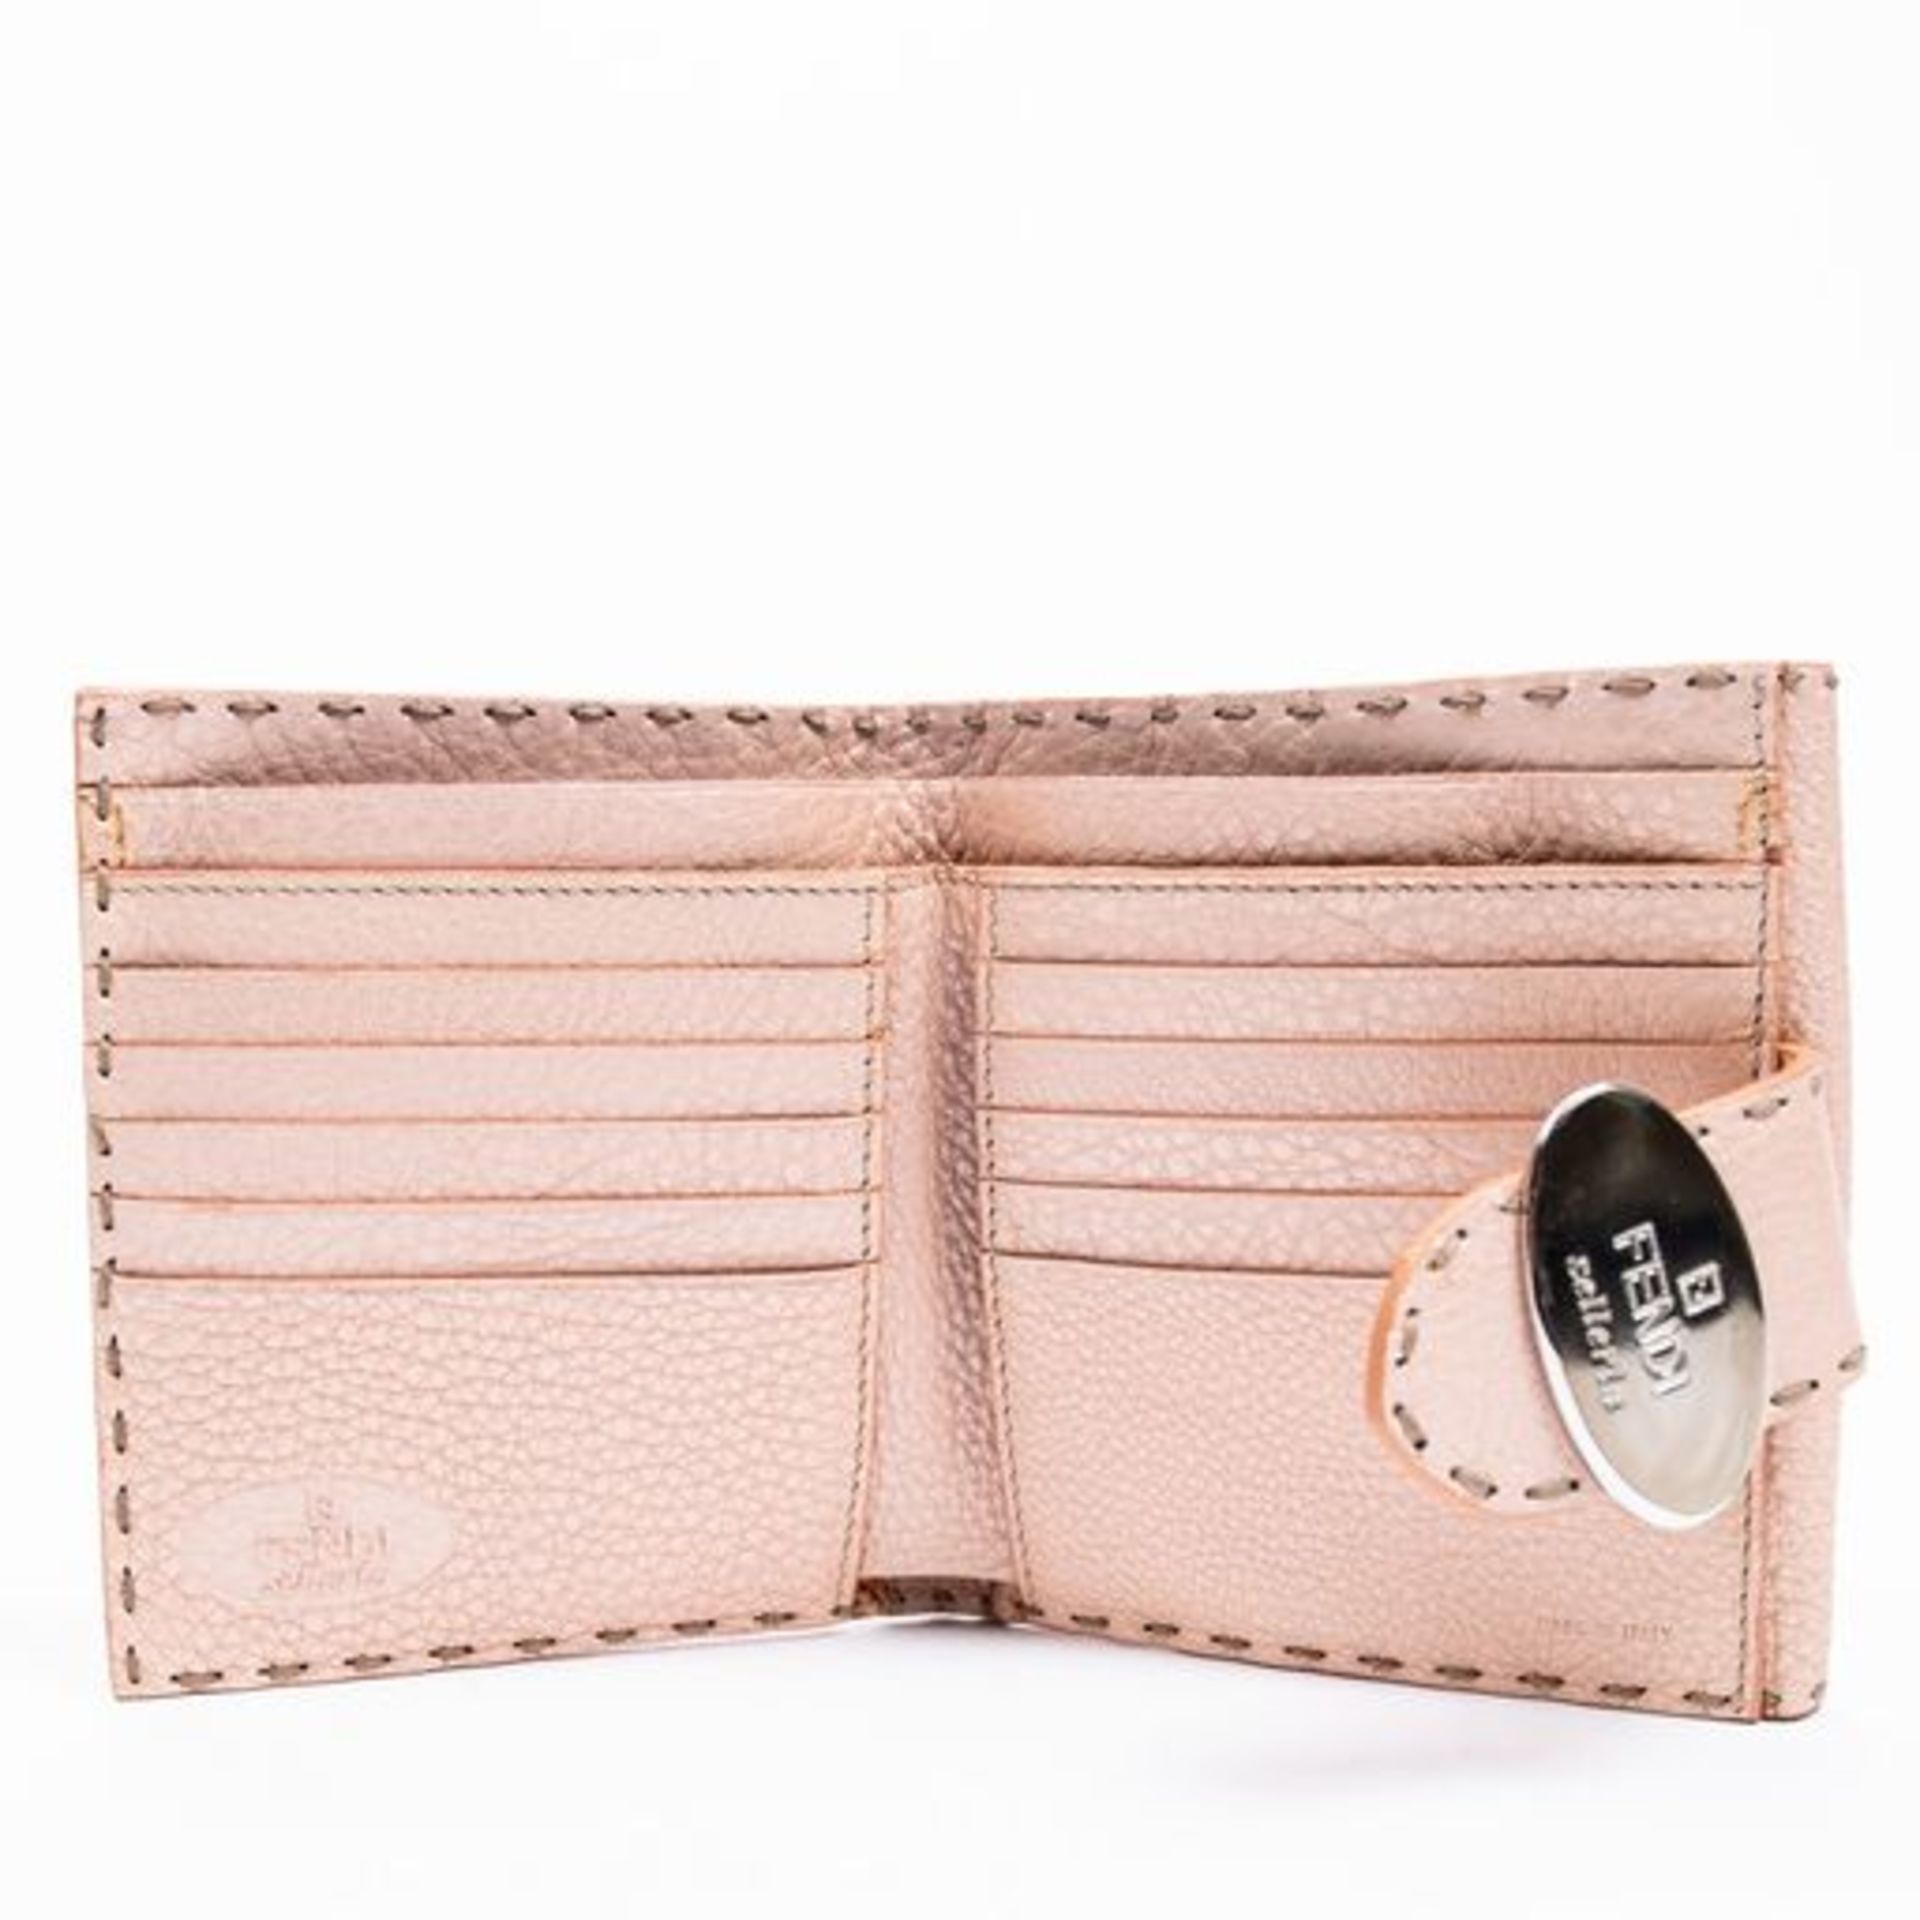 RRP £825 Fendi Selleria Compact Bifold Wallet Peach AAR3278 - Grade A - (Bags Are Not On Site, - Image 3 of 3